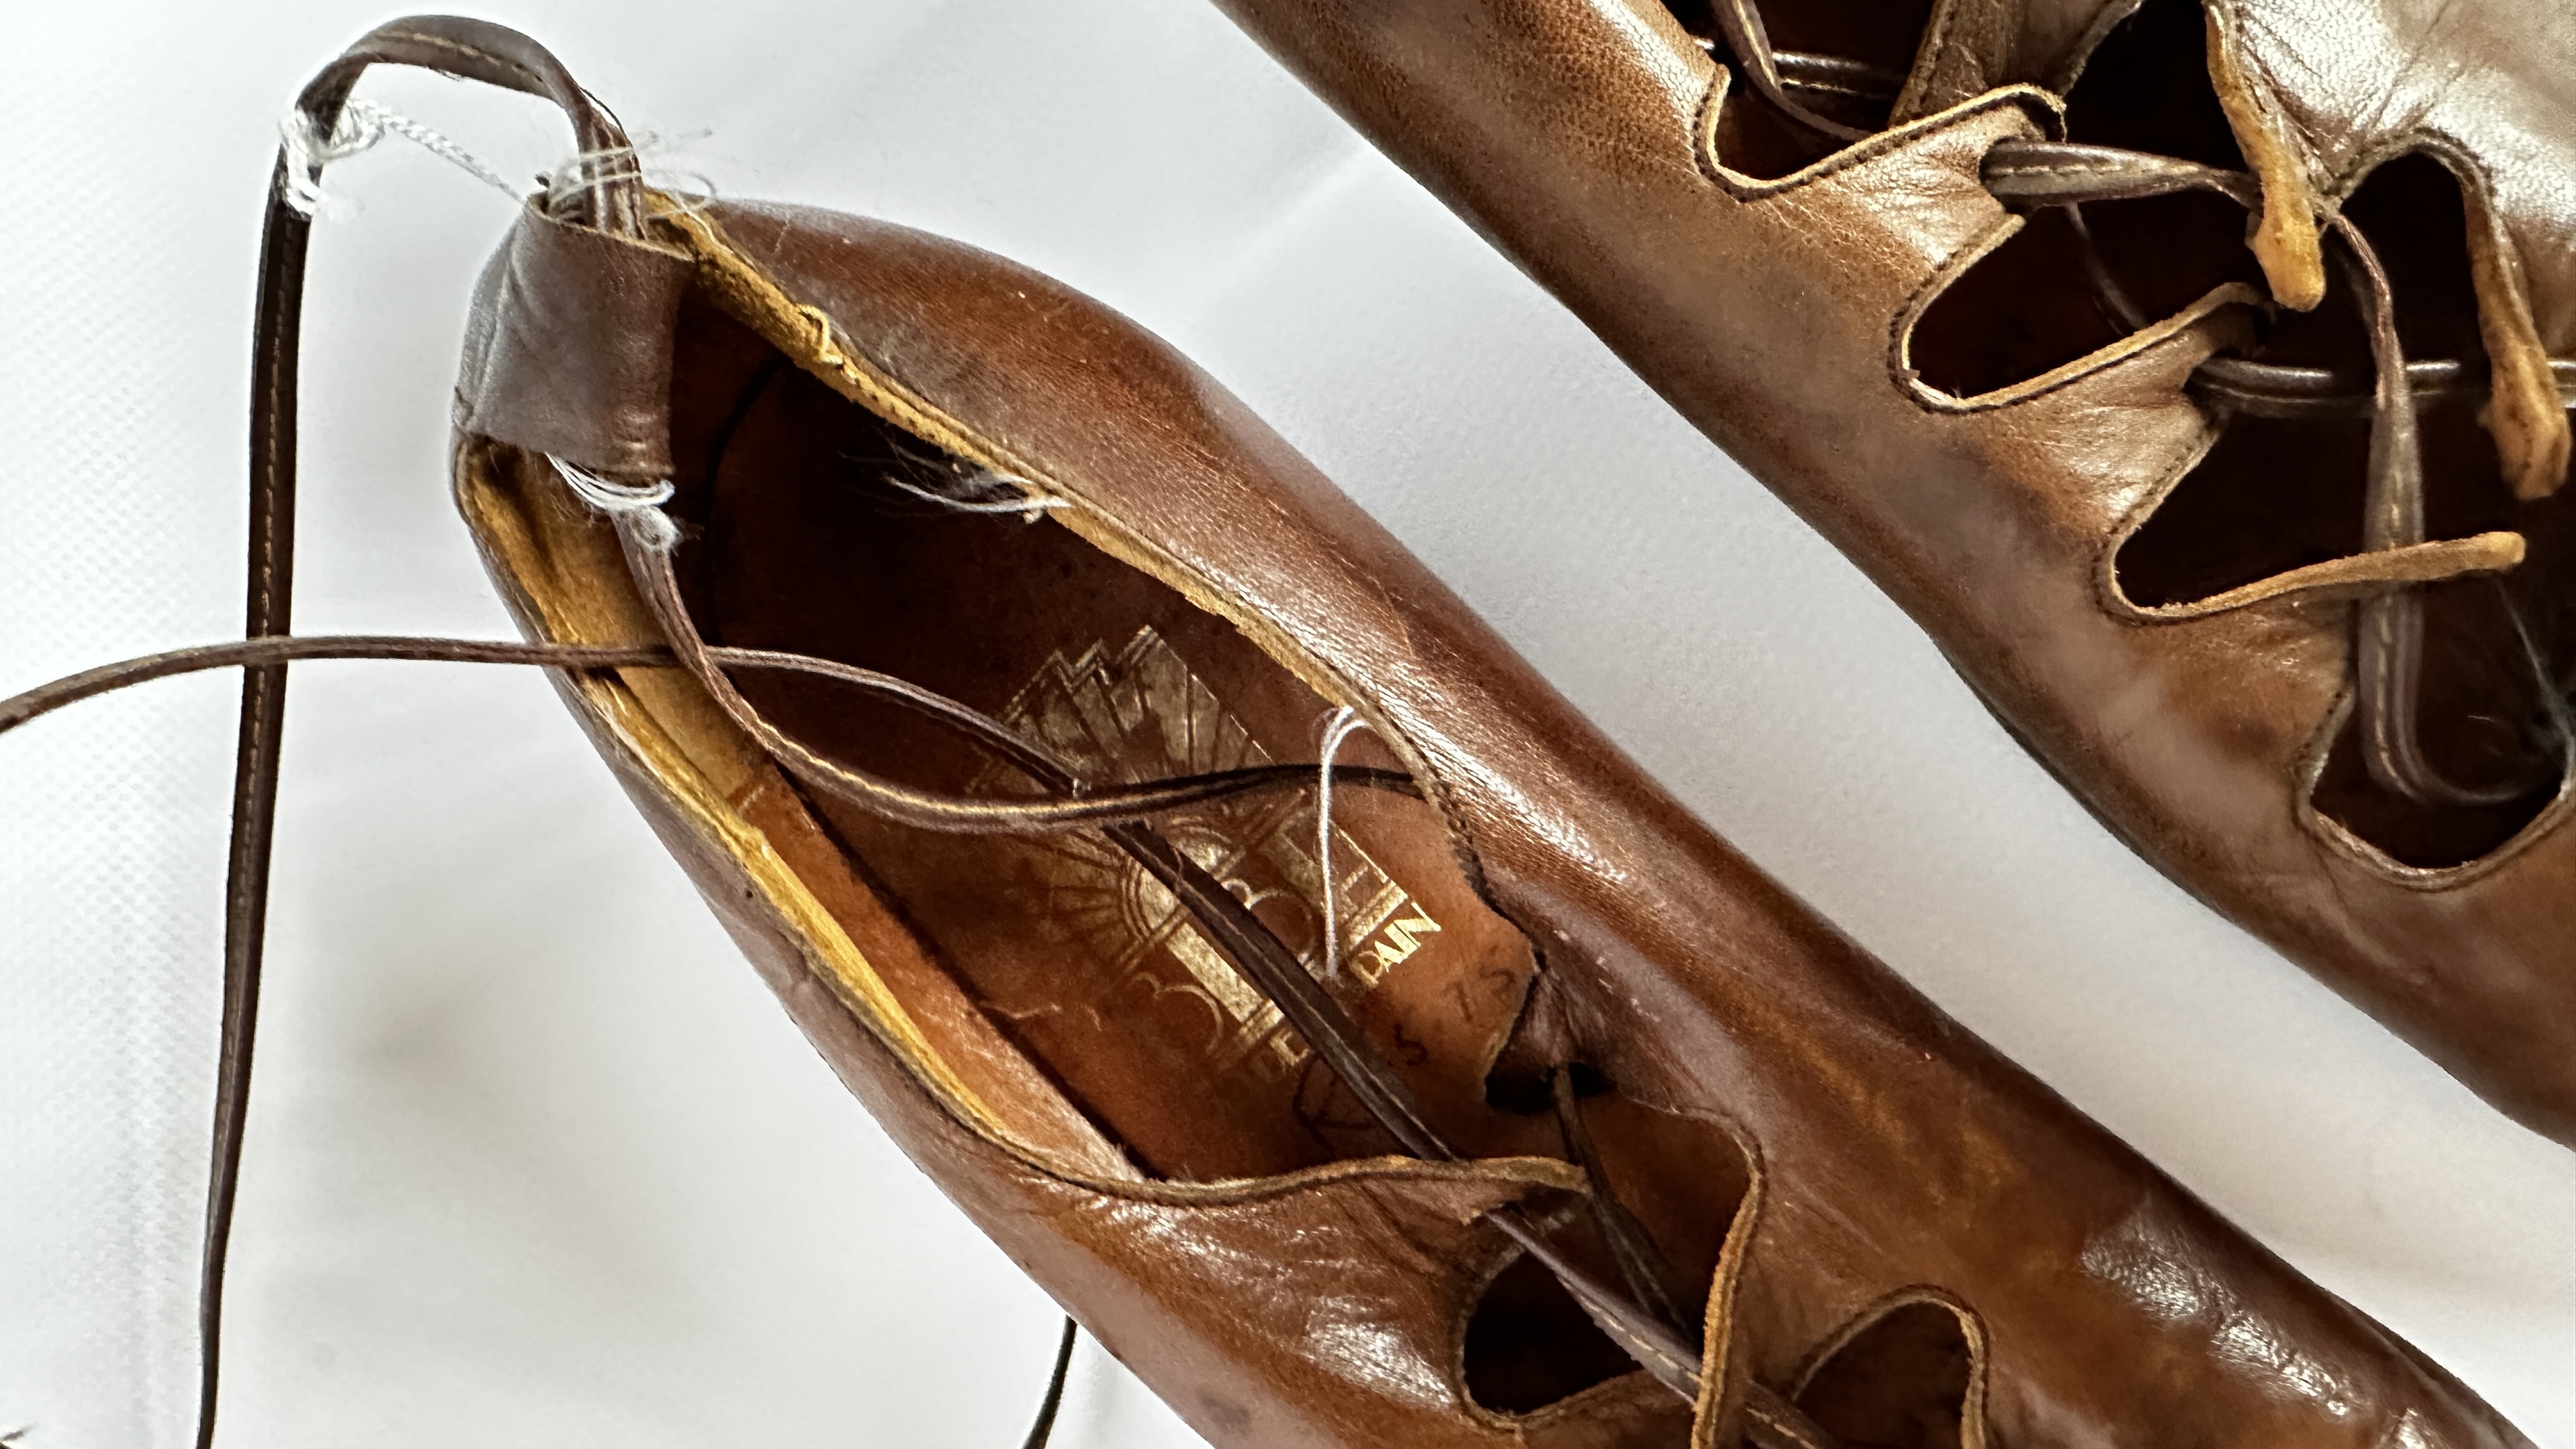 1 PAIR OF LADY'S SHOES - 'BIBA' TAN LEATHER WITH LONG LACES - A/F CONDITION, SOLD AS SEEN. - Image 10 of 14